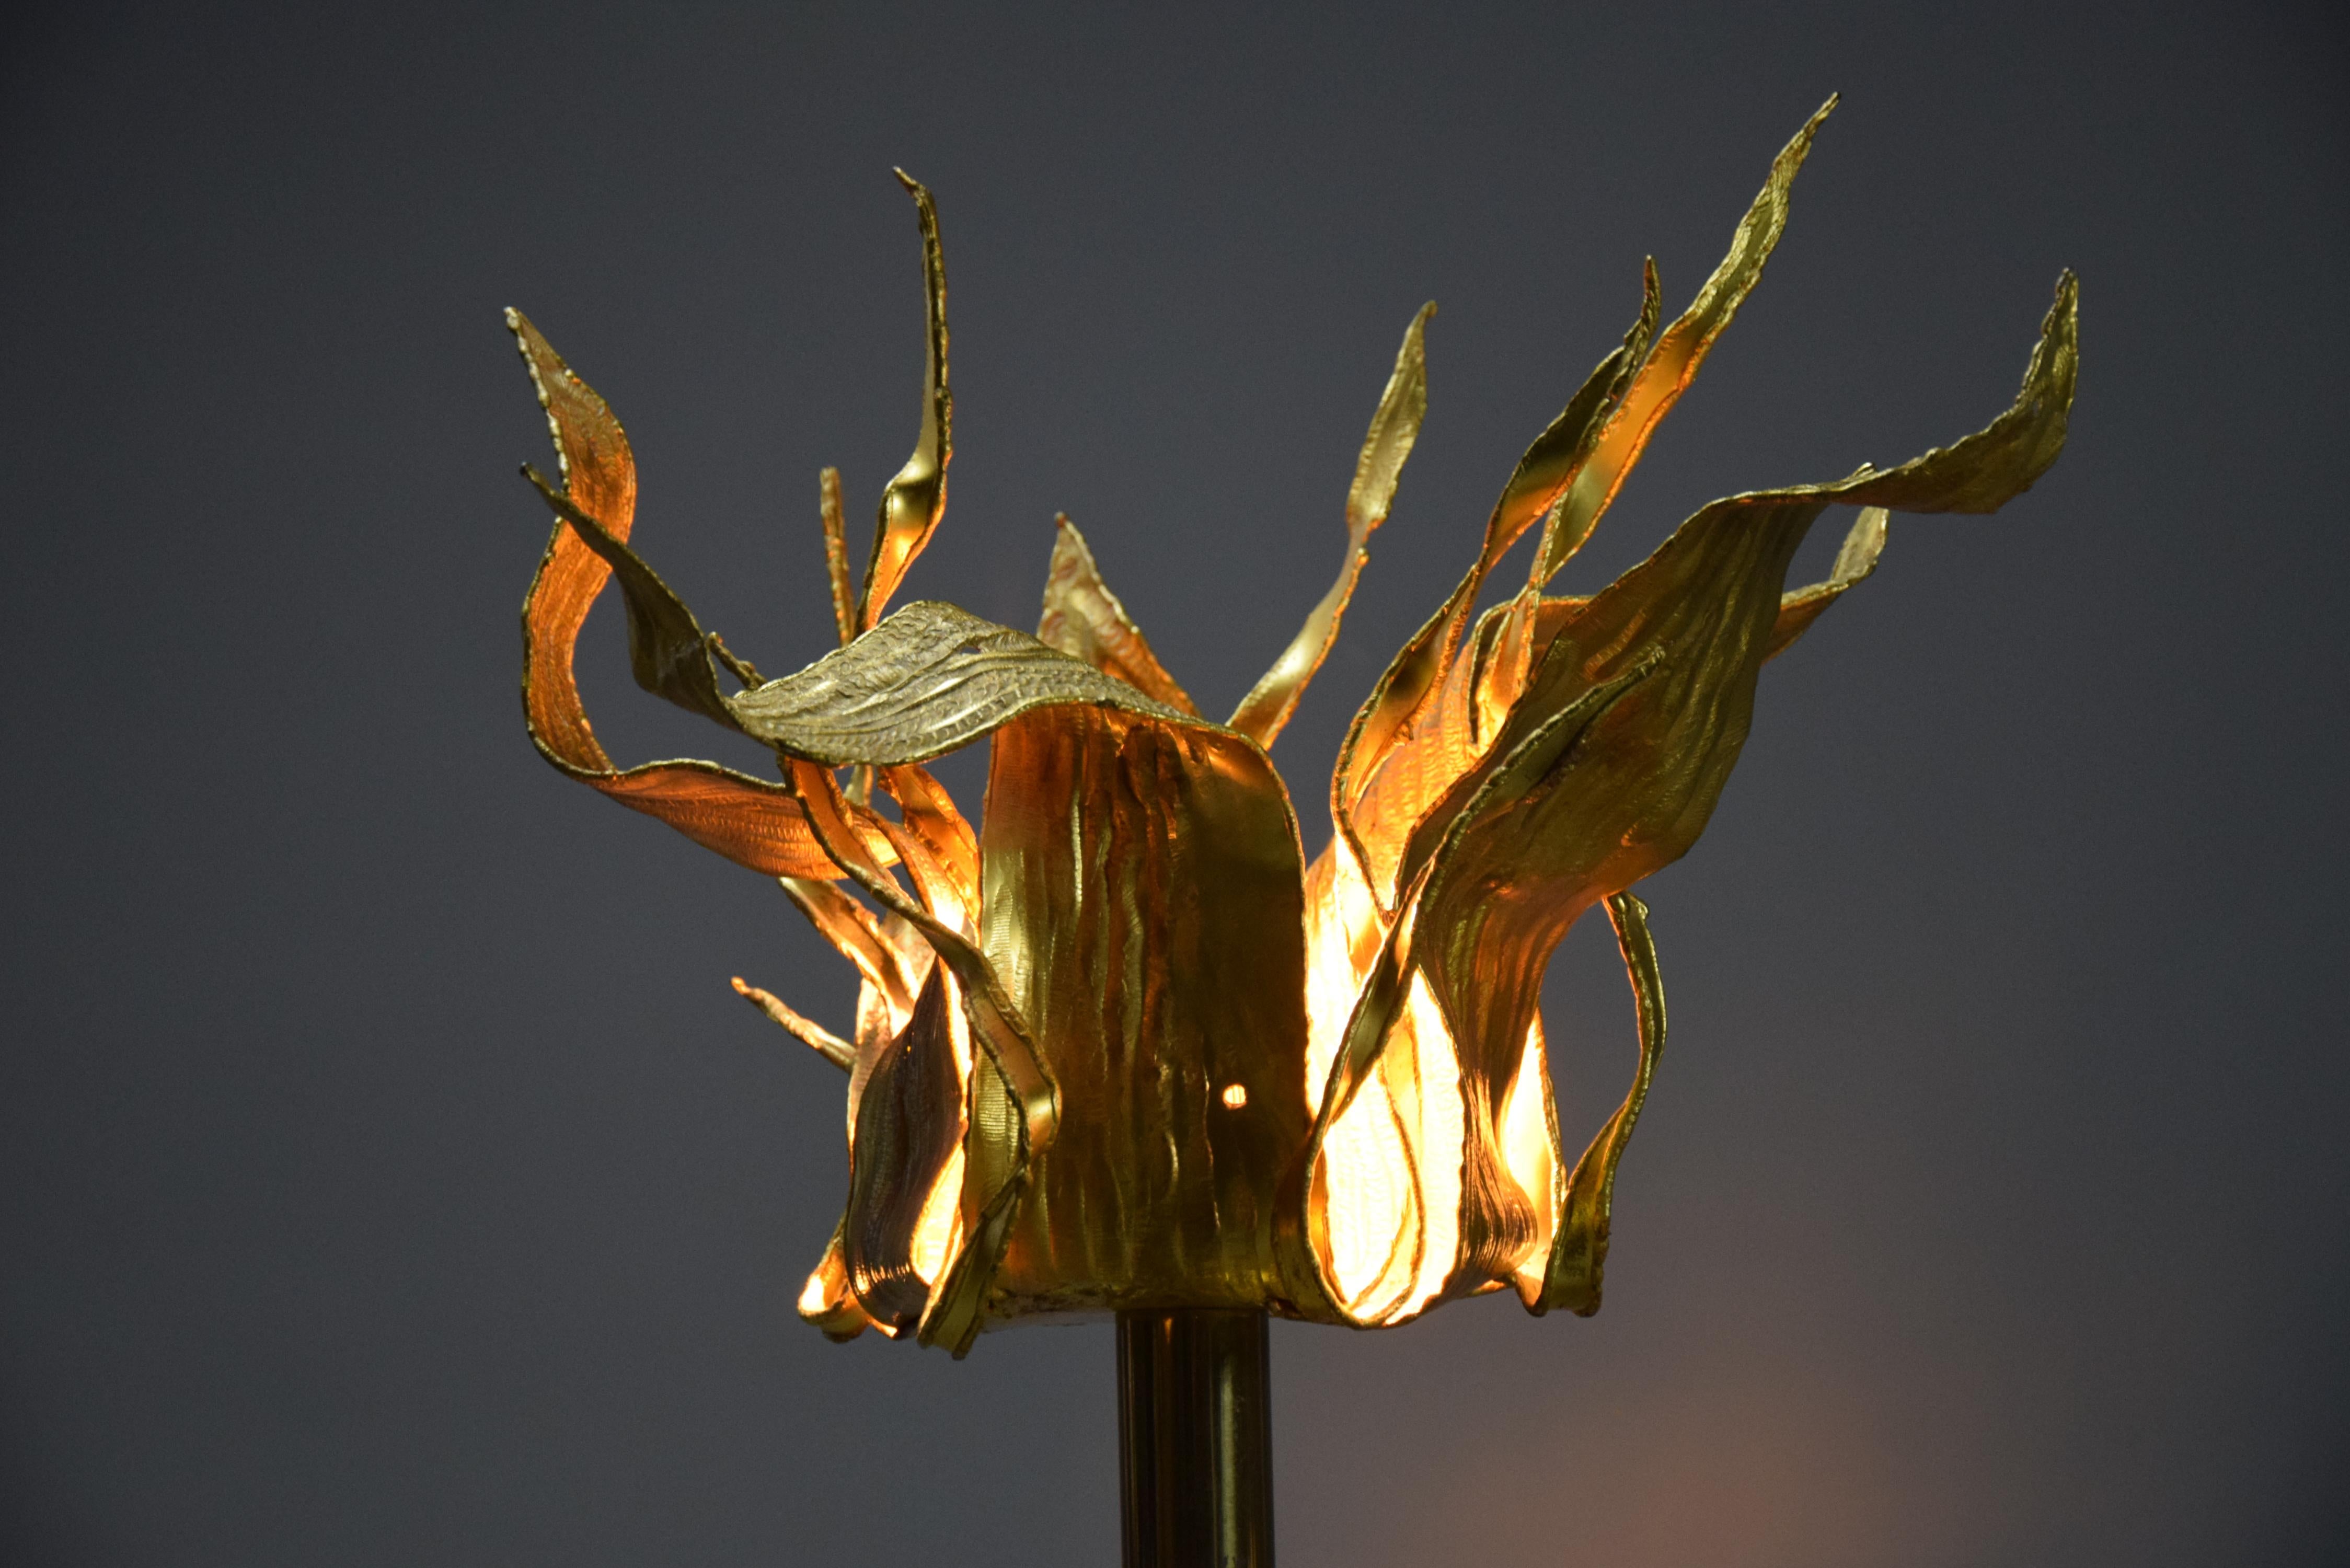 One of a kind entirely hand made gilded bronze flower table lamp by Paul Moerenhout, a famous sculptor from Bruxelles, Belgium.
The lamp is in good and working condition. Wear consistent with age and use.

Height 67 cm / 26.37 inch. Diameter 51 cm /